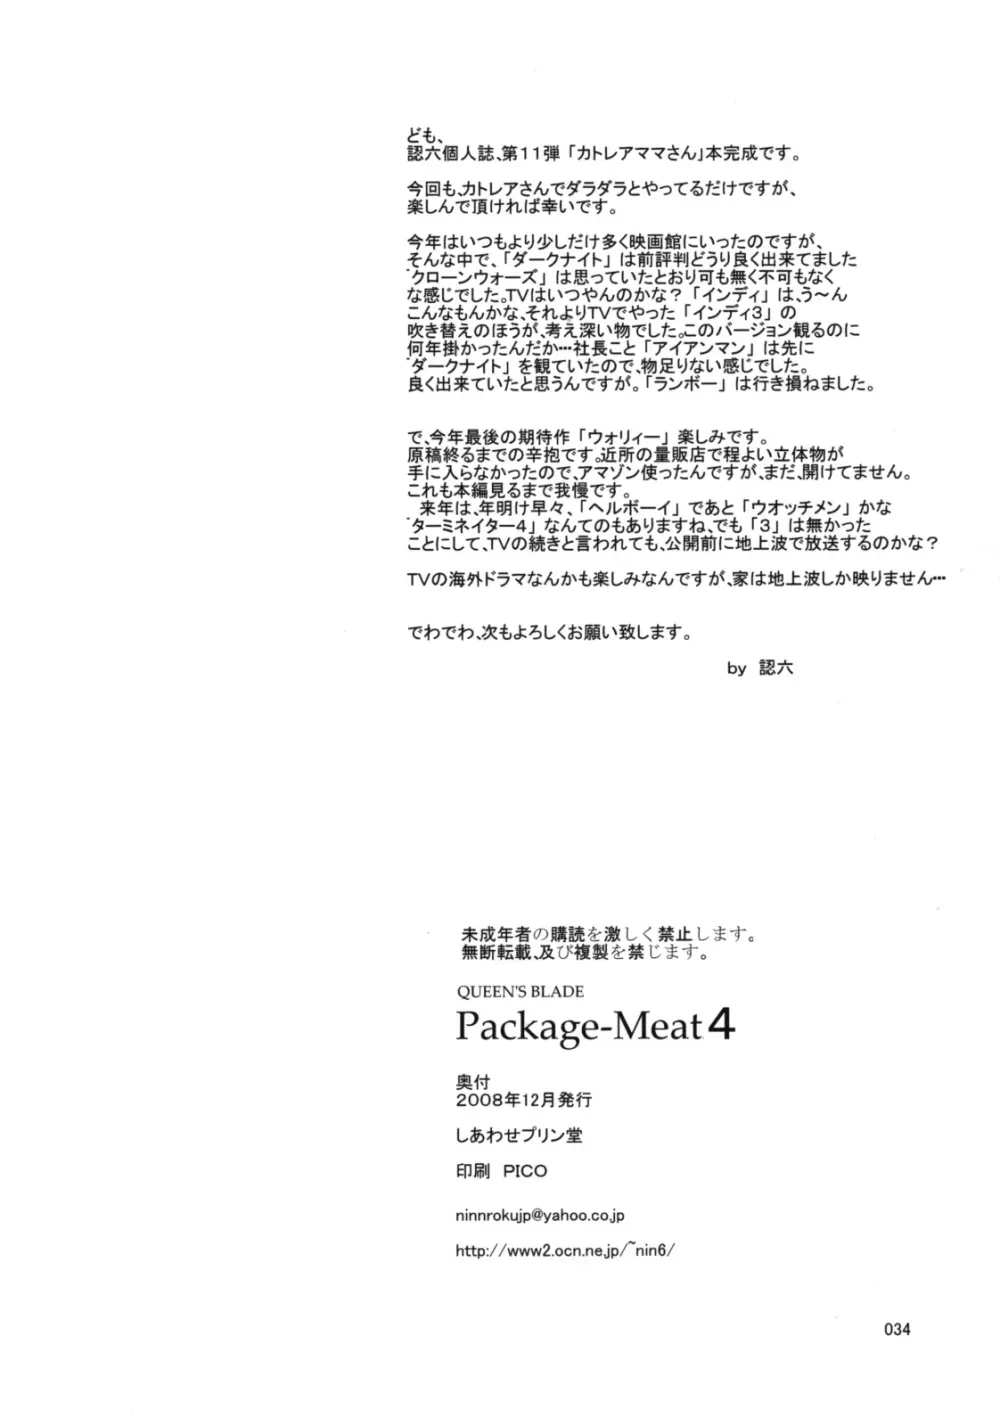 Package Meat 4 33ページ